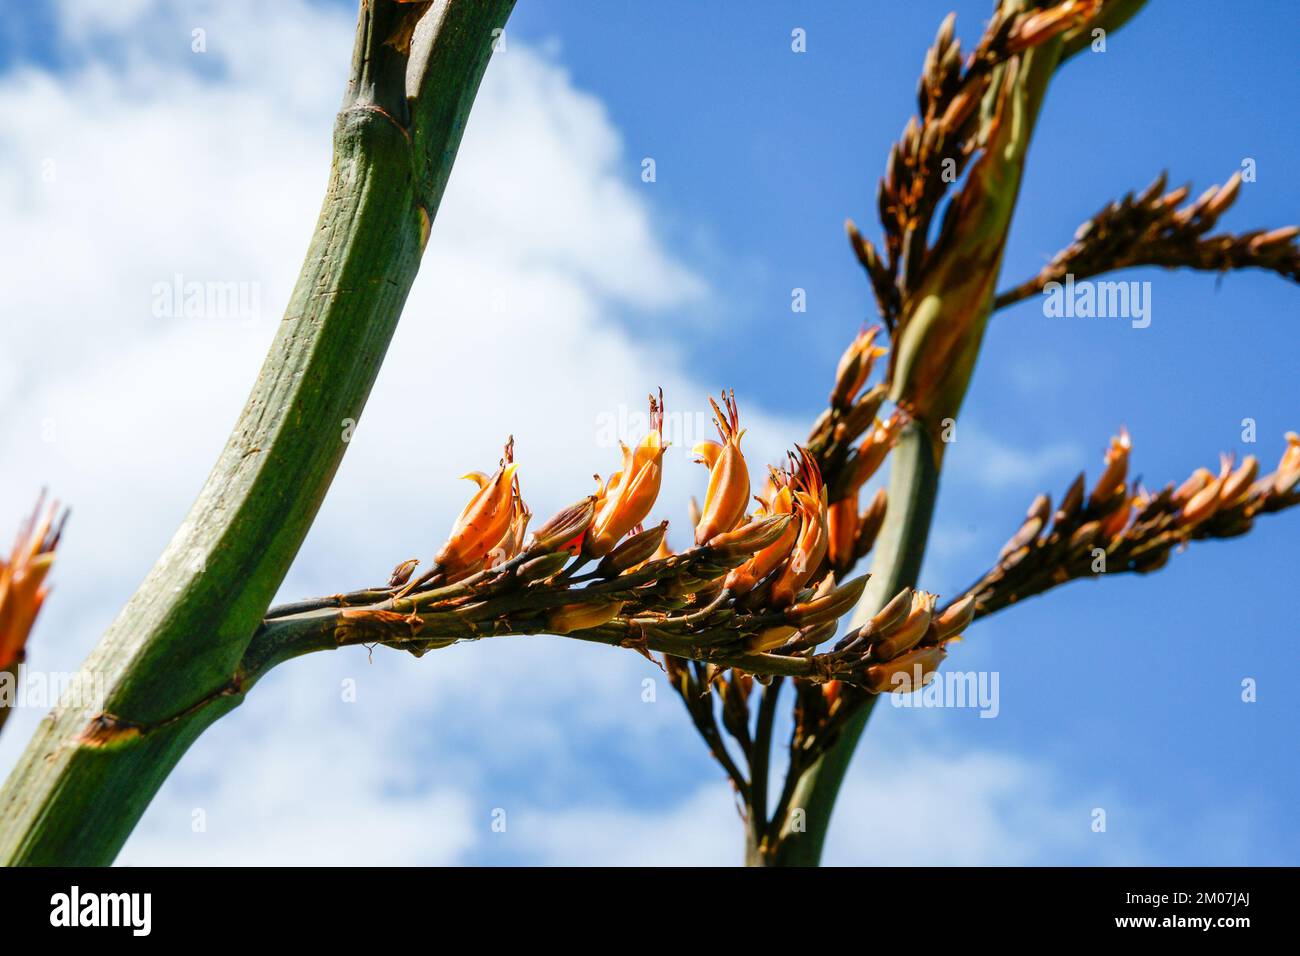 Closeup New Zealand flax flower showing detail against blue sky with white clouds Stock Photo